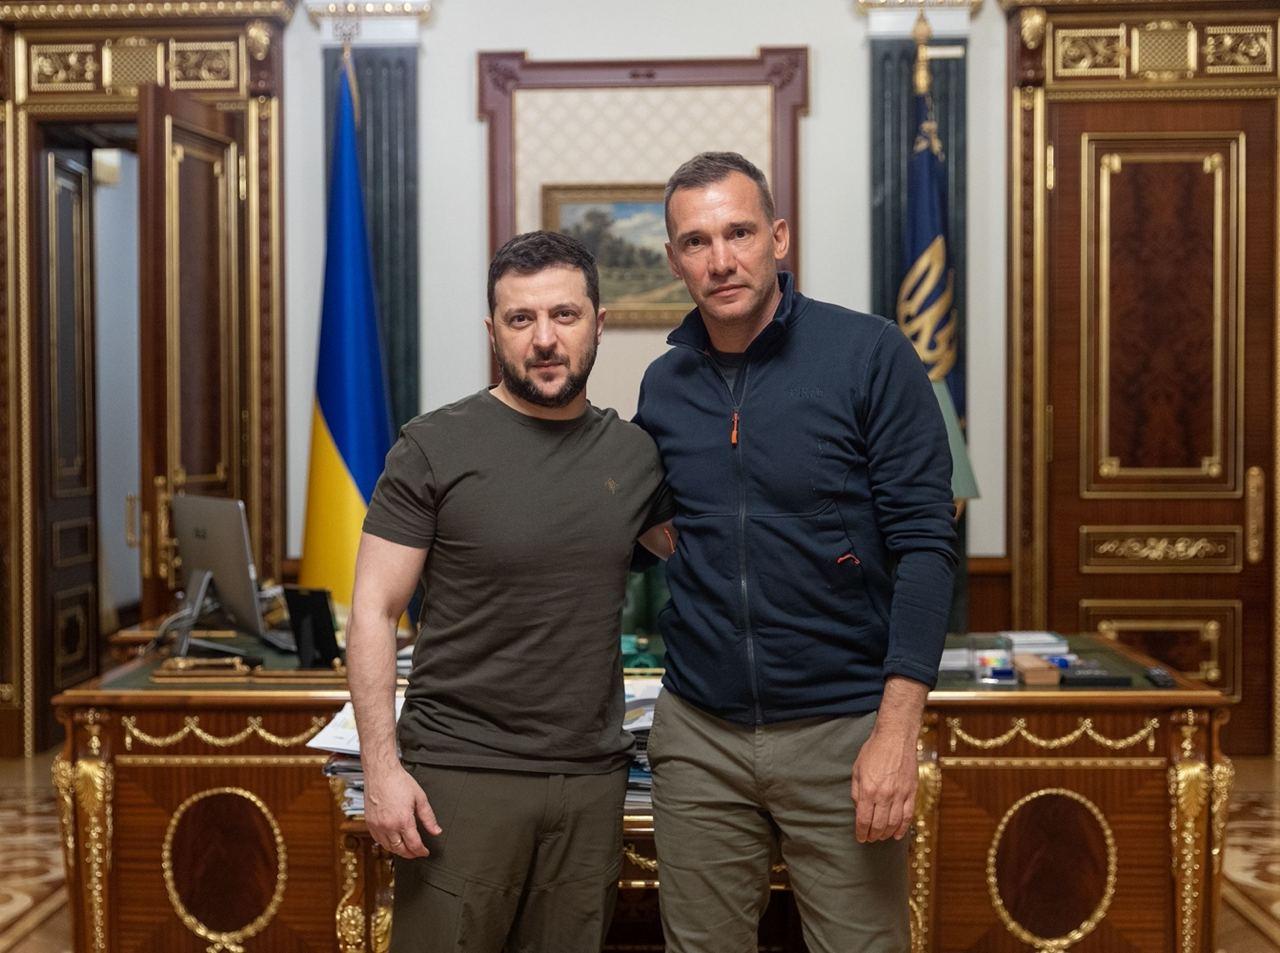 Andriy Shevchenko became the first ambassador of UNITED 24